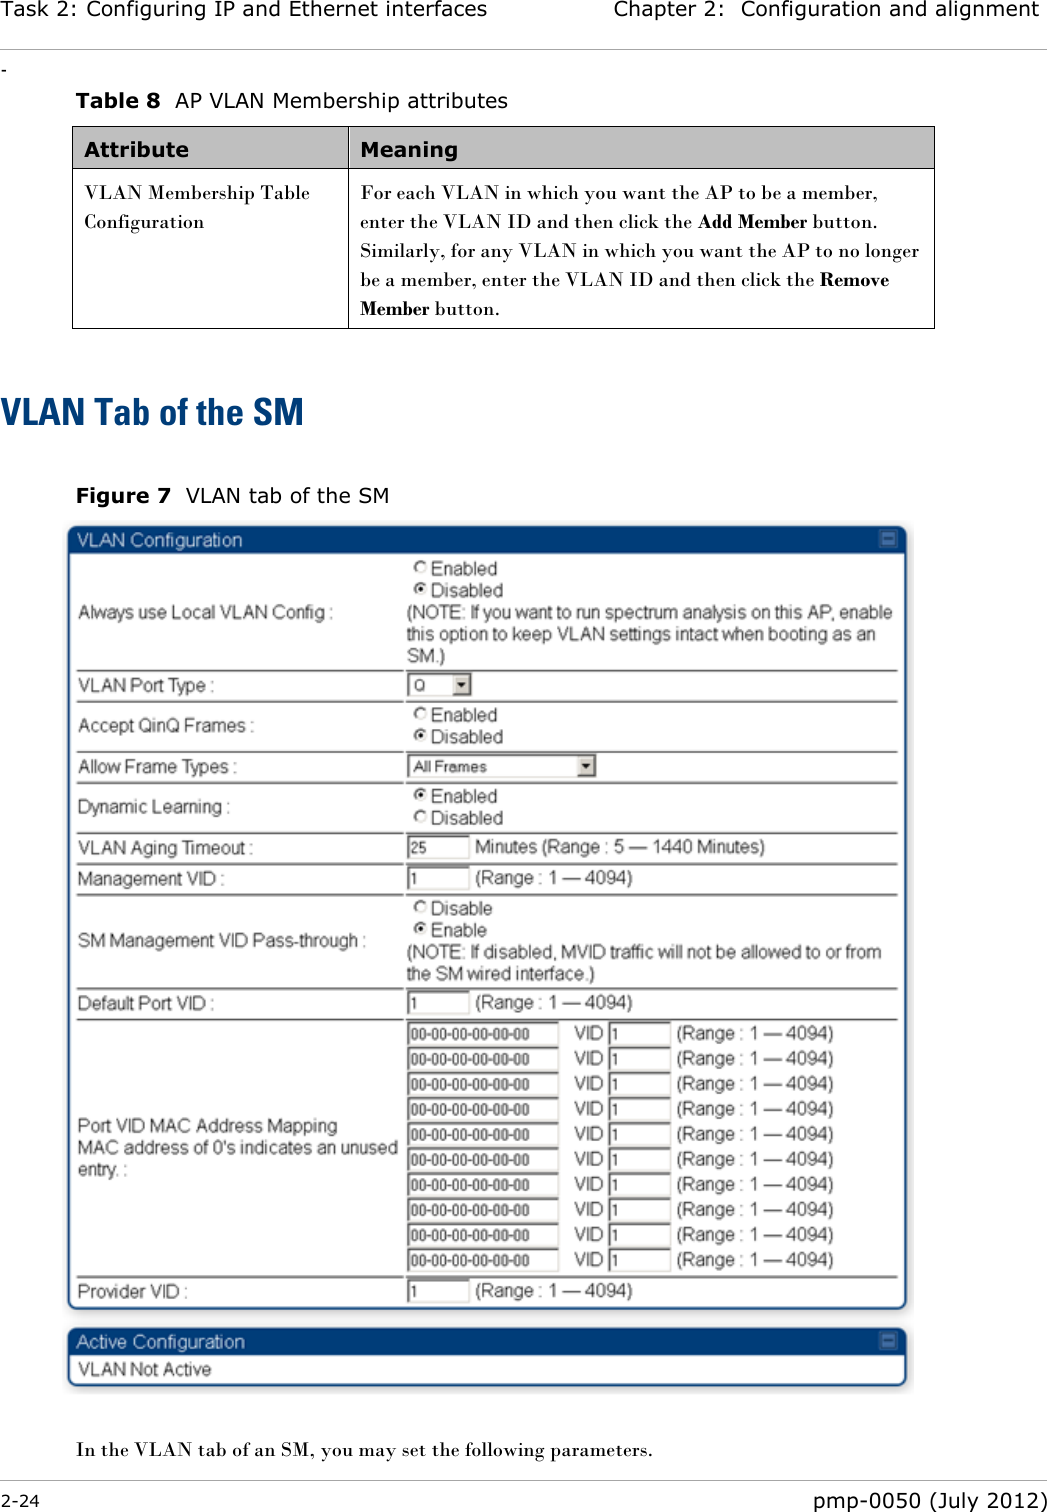 Task 2: Configuring IP and Ethernet interfaces Chapter 2:  Configuration and alignment - 2-24  pmp-0050 (July 2012)  Table 8  AP VLAN Membership attributes Attribute Meaning VLAN Membership Table Configuration For each VLAN in which you want the AP to be a member, enter the VLAN ID and then click the Add Member button. Similarly, for any VLAN in which you want the AP to no longer be a member, enter the VLAN ID and then click the Remove Member button.  VLAN Tab of the SM  Figure 7  VLAN tab of the SM   In the VLAN tab of an SM, you may set the following parameters. 